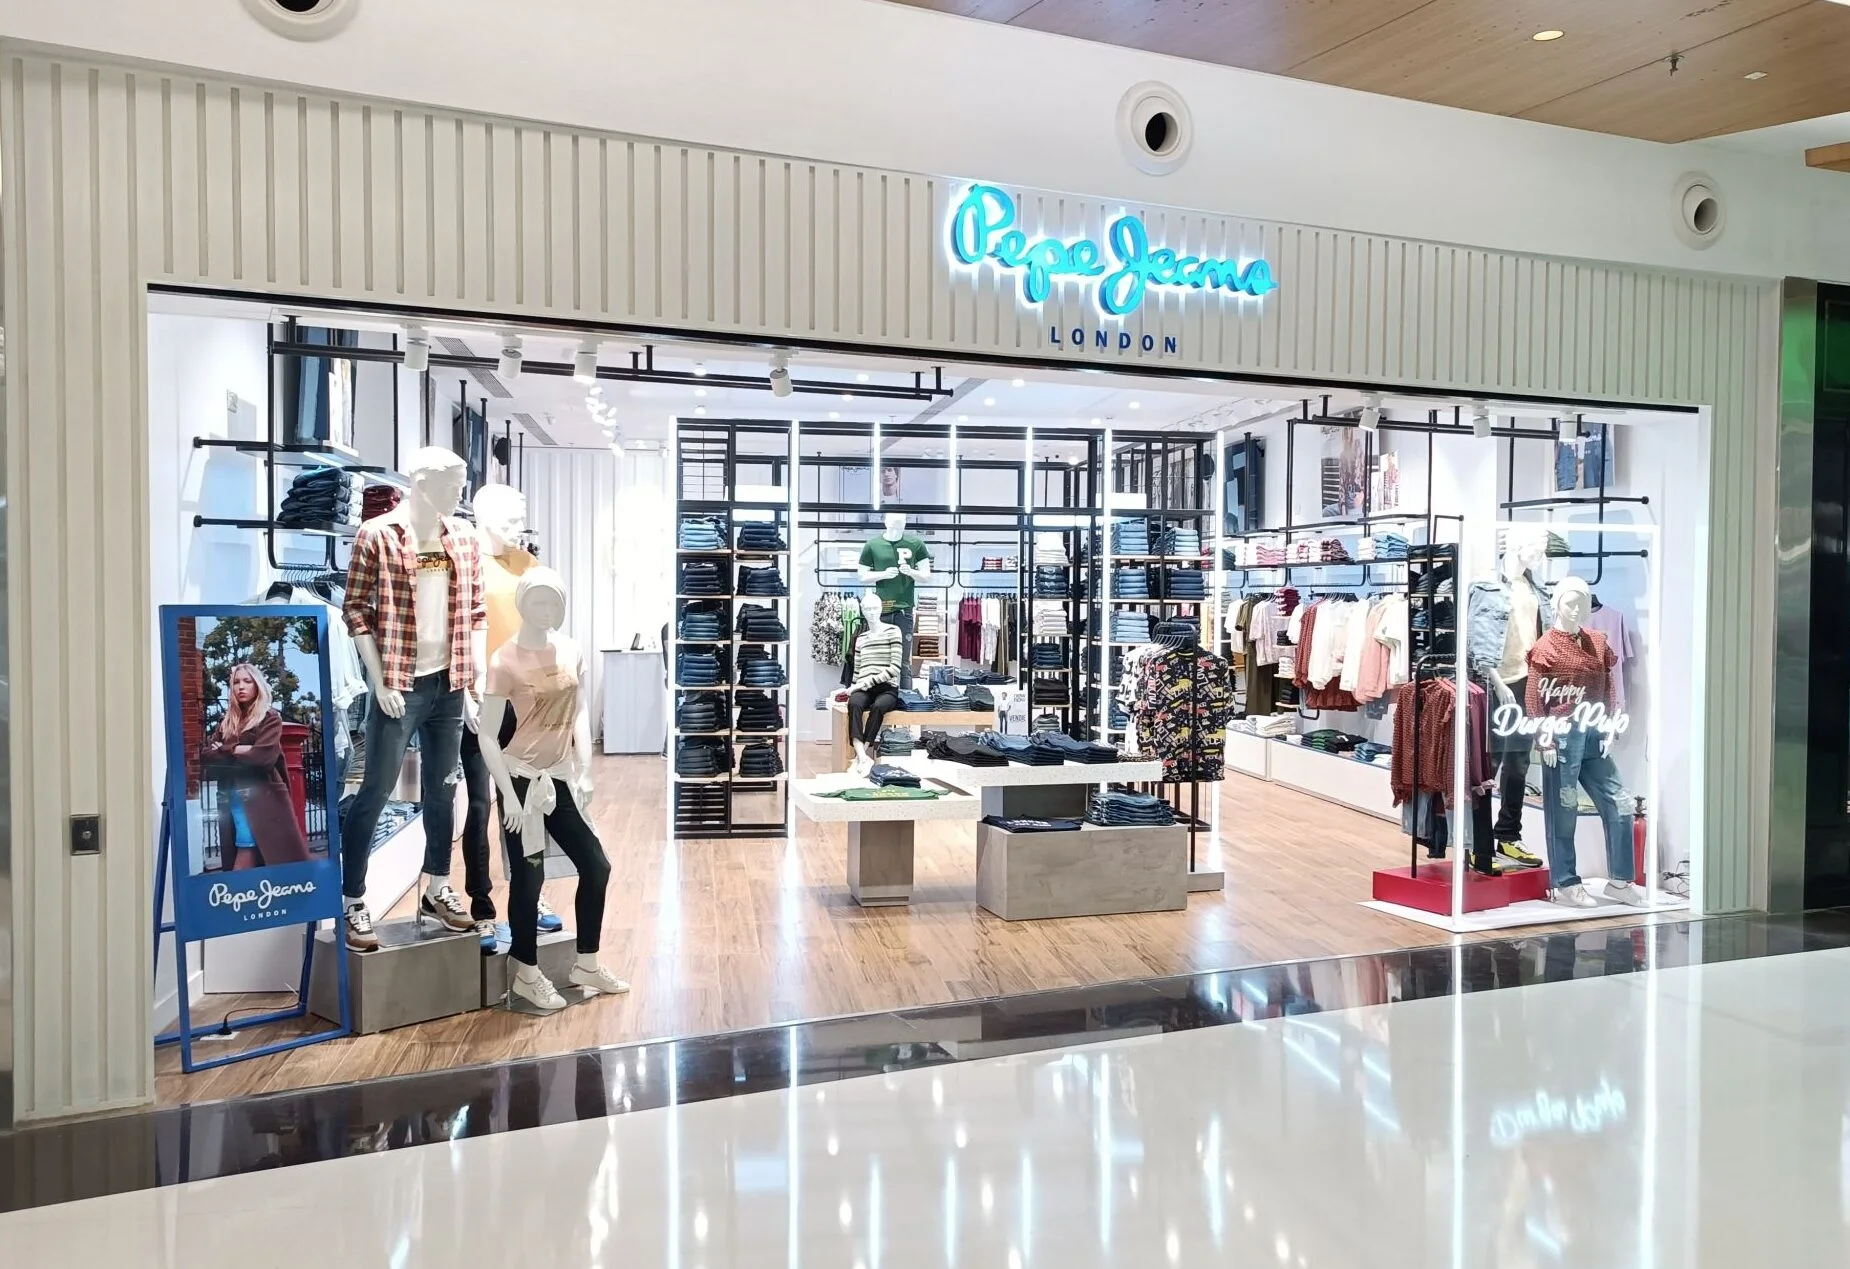 Pepe Jeans aims Rs 2,000 crore sales in the next 3 years, to add